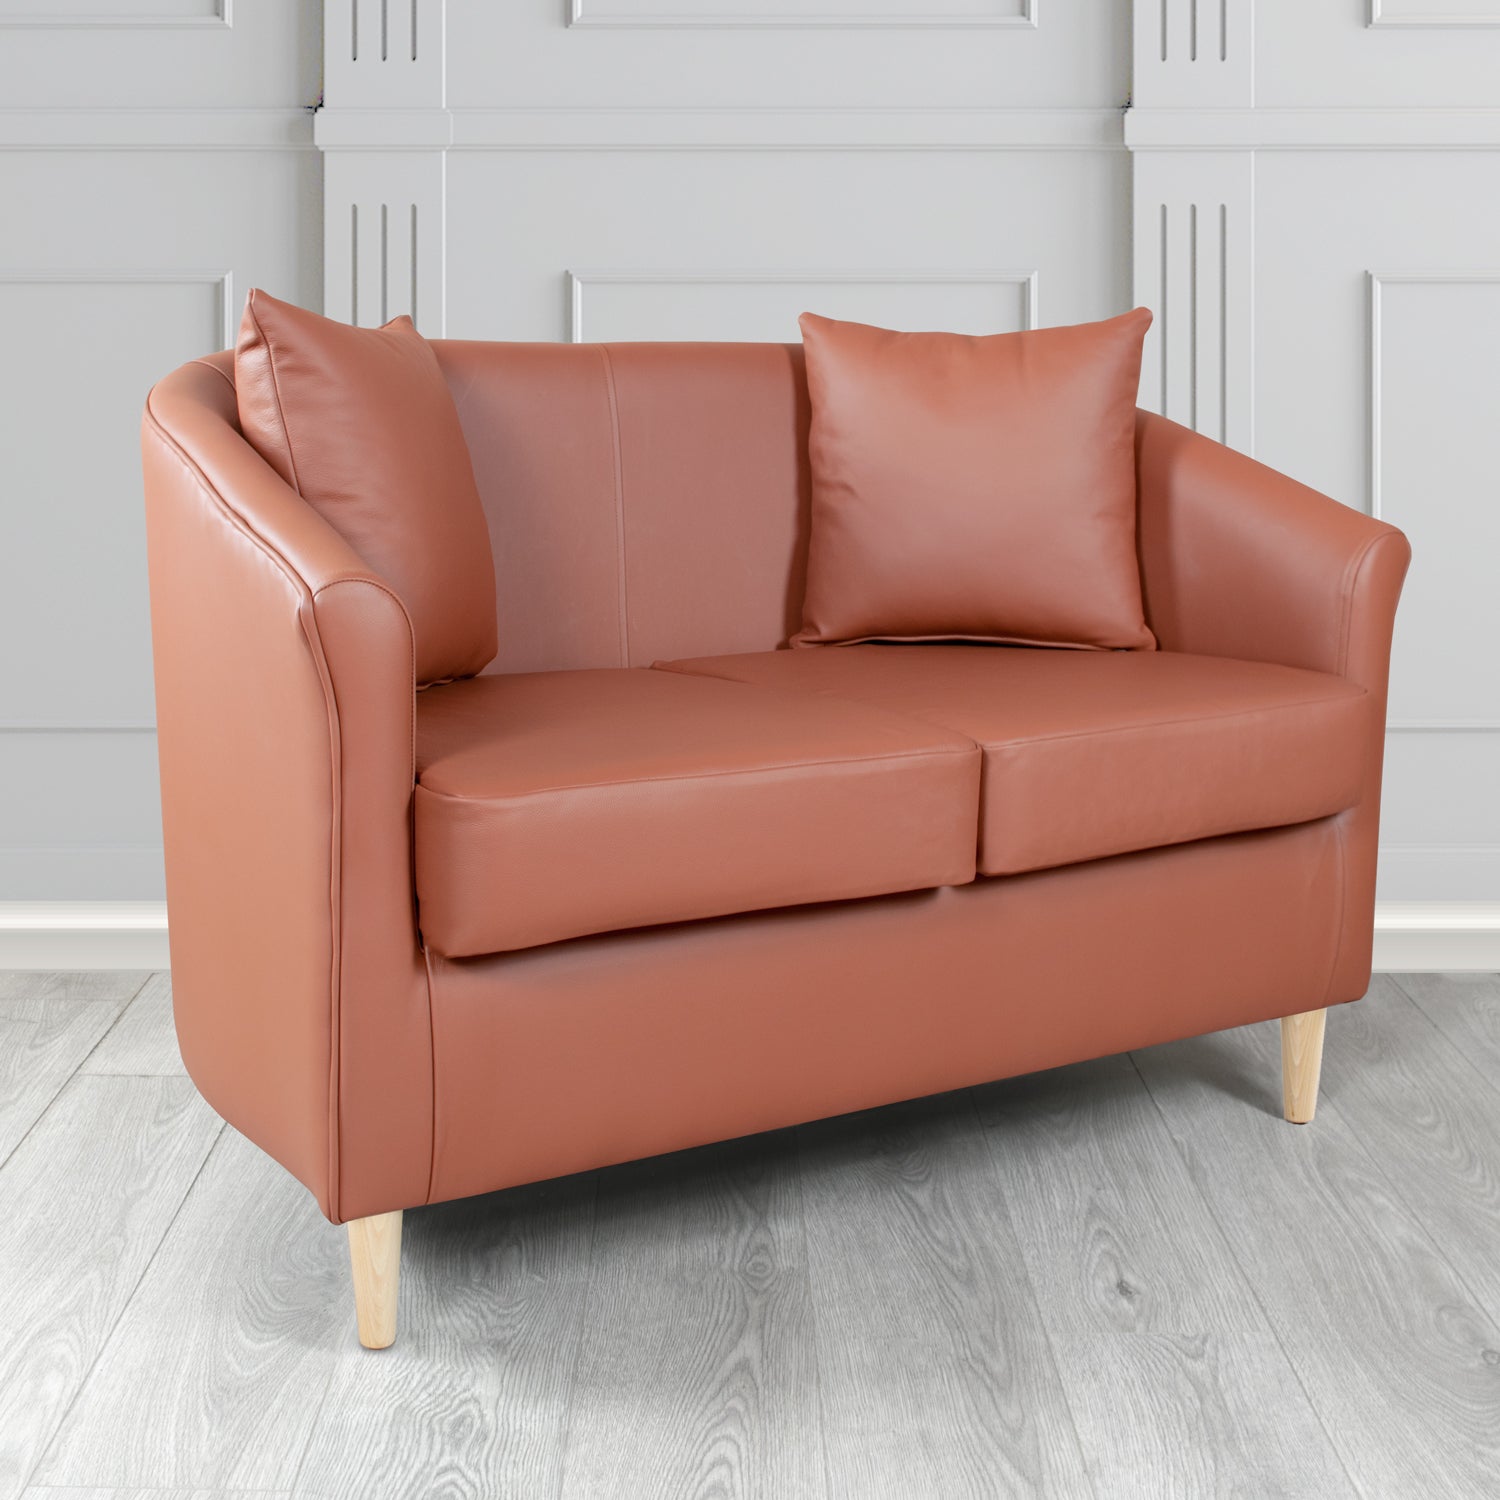 St Tropez Shelly Wood Burner Crib 5 Genuine Leather 2 Seater Tub Sofa with Scatter Cushions - The Tub Chair Shop